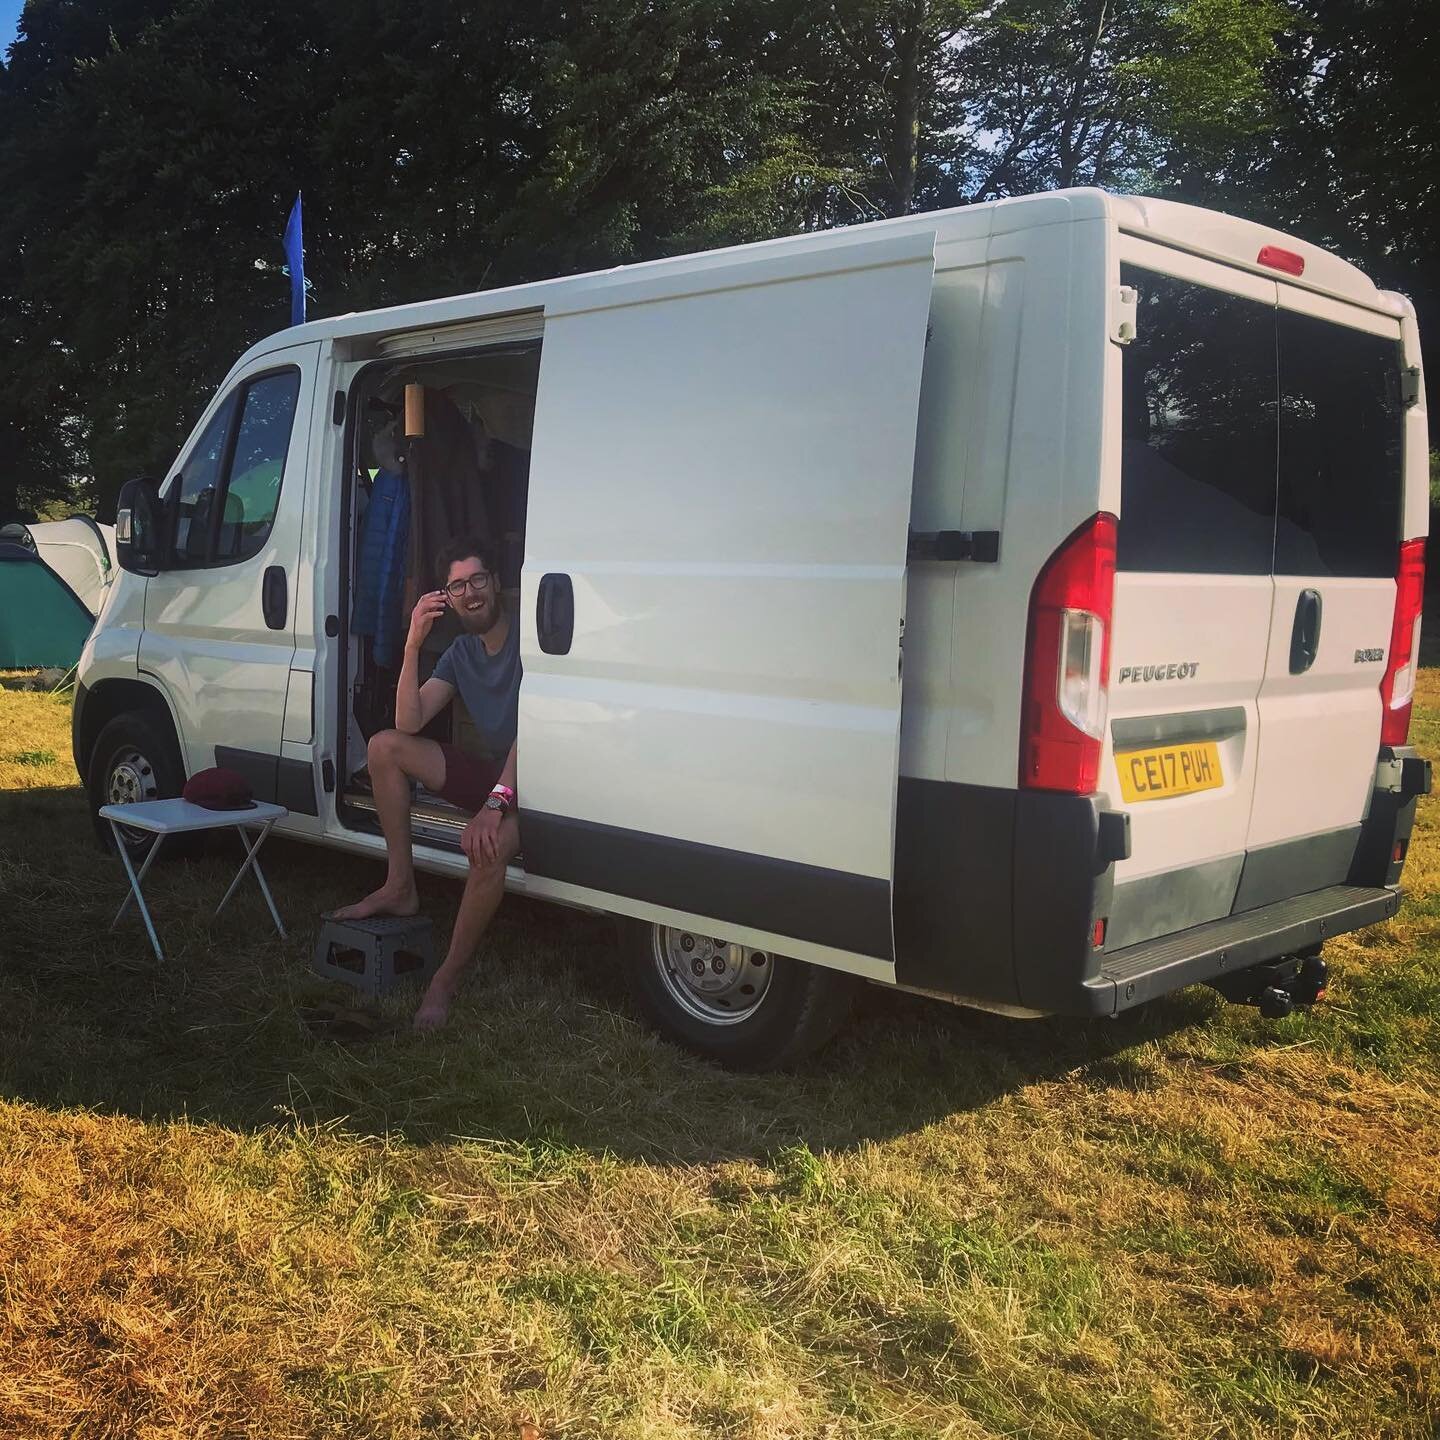 🙏PLEASE SHARE 🙏 
UK FOLK - WE NEED YOUR HELP!!! 
Someone has just stolen YetiMoon our beloved Campervan that we&rsquo;ve just finished converting after a year and a half and are planning a trip away in!! 

She was stolen at 7:25pm from right outsid